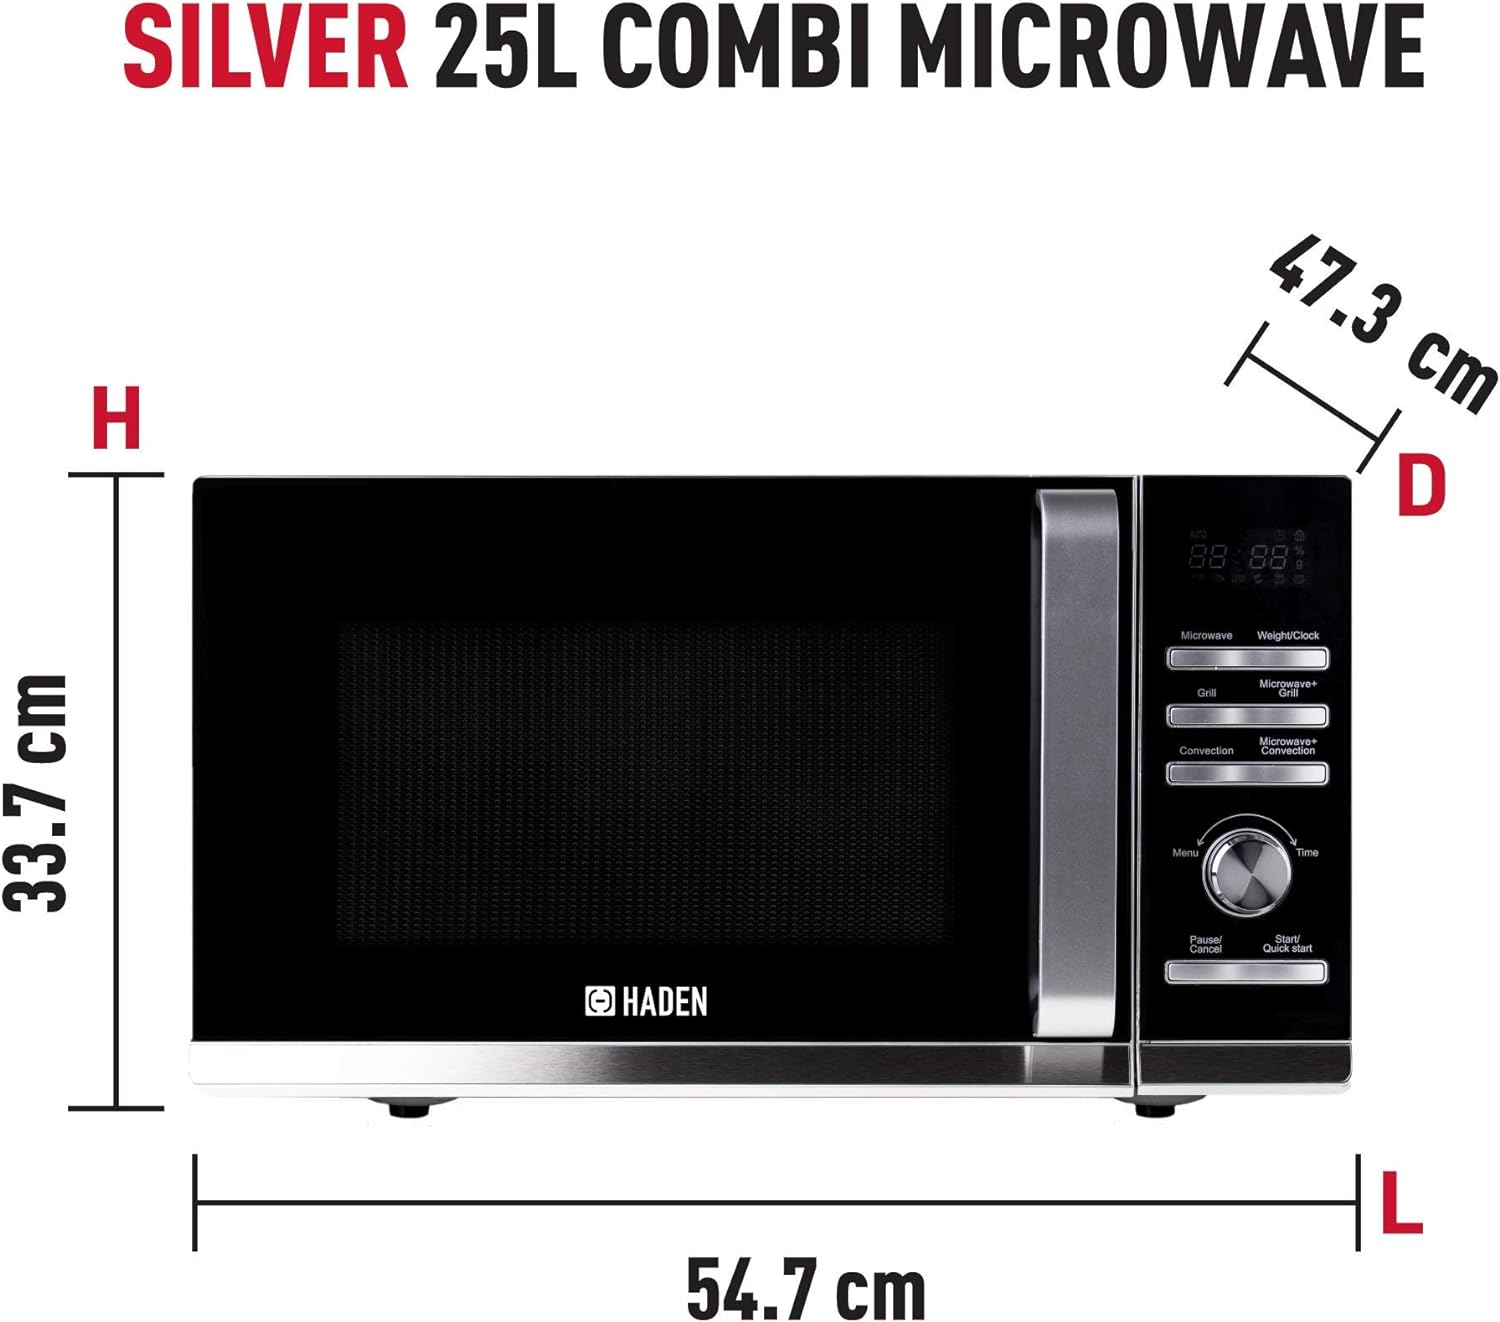 Haden Microwave Combination Oven – Convection Oven Grill, 900W, 25L, Silver combi microwave - 8 Auto Cook Programs - 5 Power Levels - Child Lock System